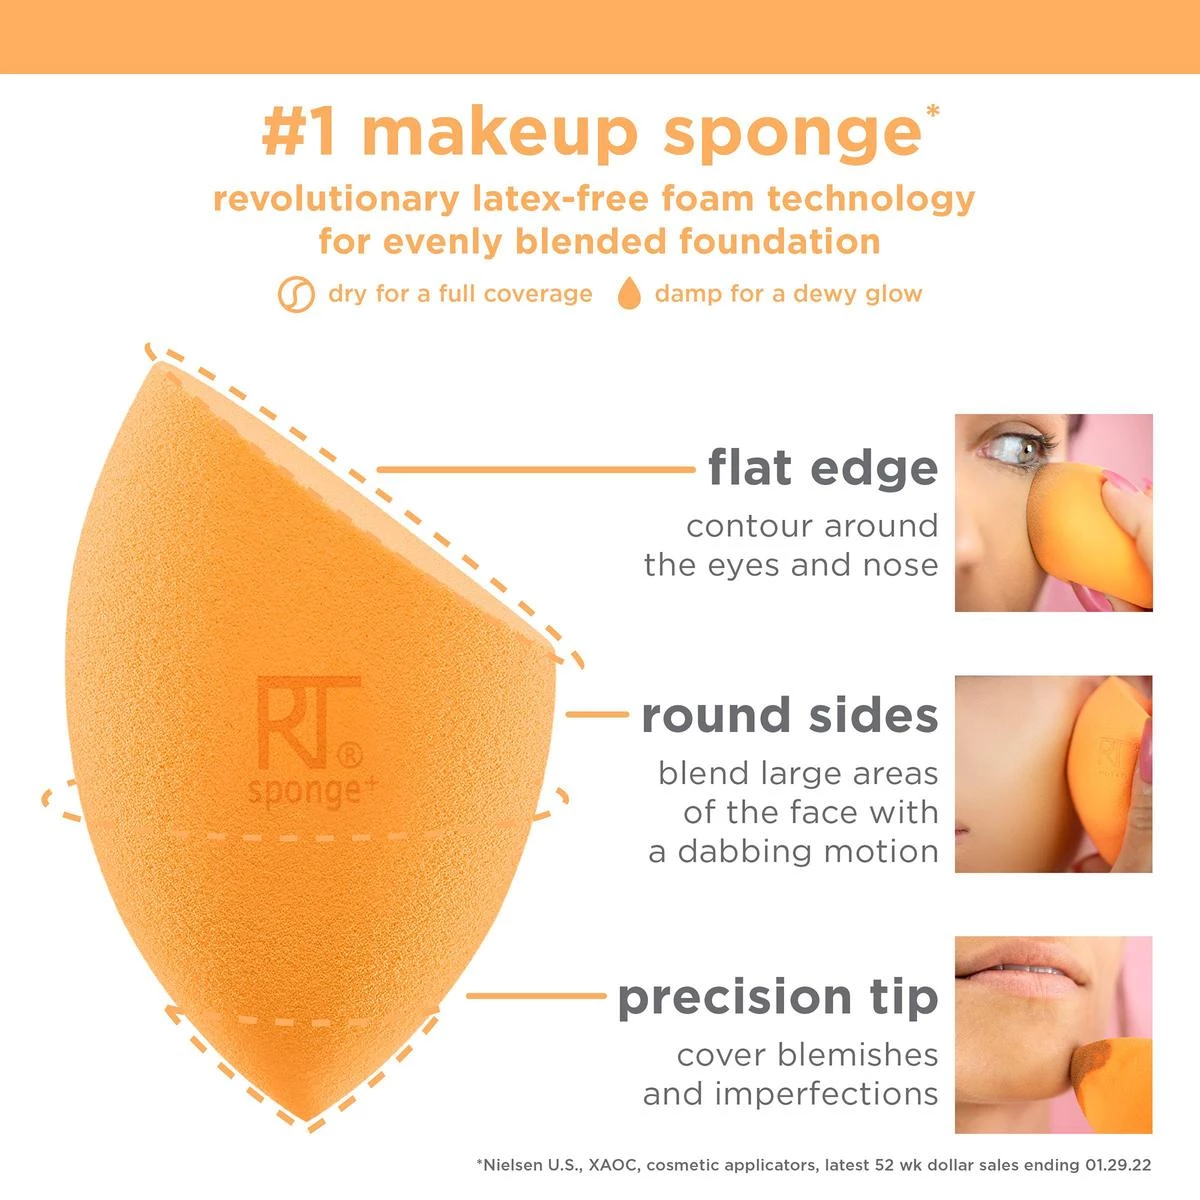 Image 1, number 1 makeup sponge, revolutionary latex free foam technology for evenly blended foundation, dry for full coverage, damp for a dewy coverage. flat edge for contour around the eyes and nose, round sides blend large areas of the face with a dabbing motion, precision tip cover blemishes and imperfections. Image 2, miracle powder sponge, blend and finish. use dry for matte finish, use damp for a satin finish. flat edge set and bake powder under eyes, around nose and around mouth. round sides, blend large areas of the face with a dabbing or sweeping motion. precision tip cover and perfect with precision